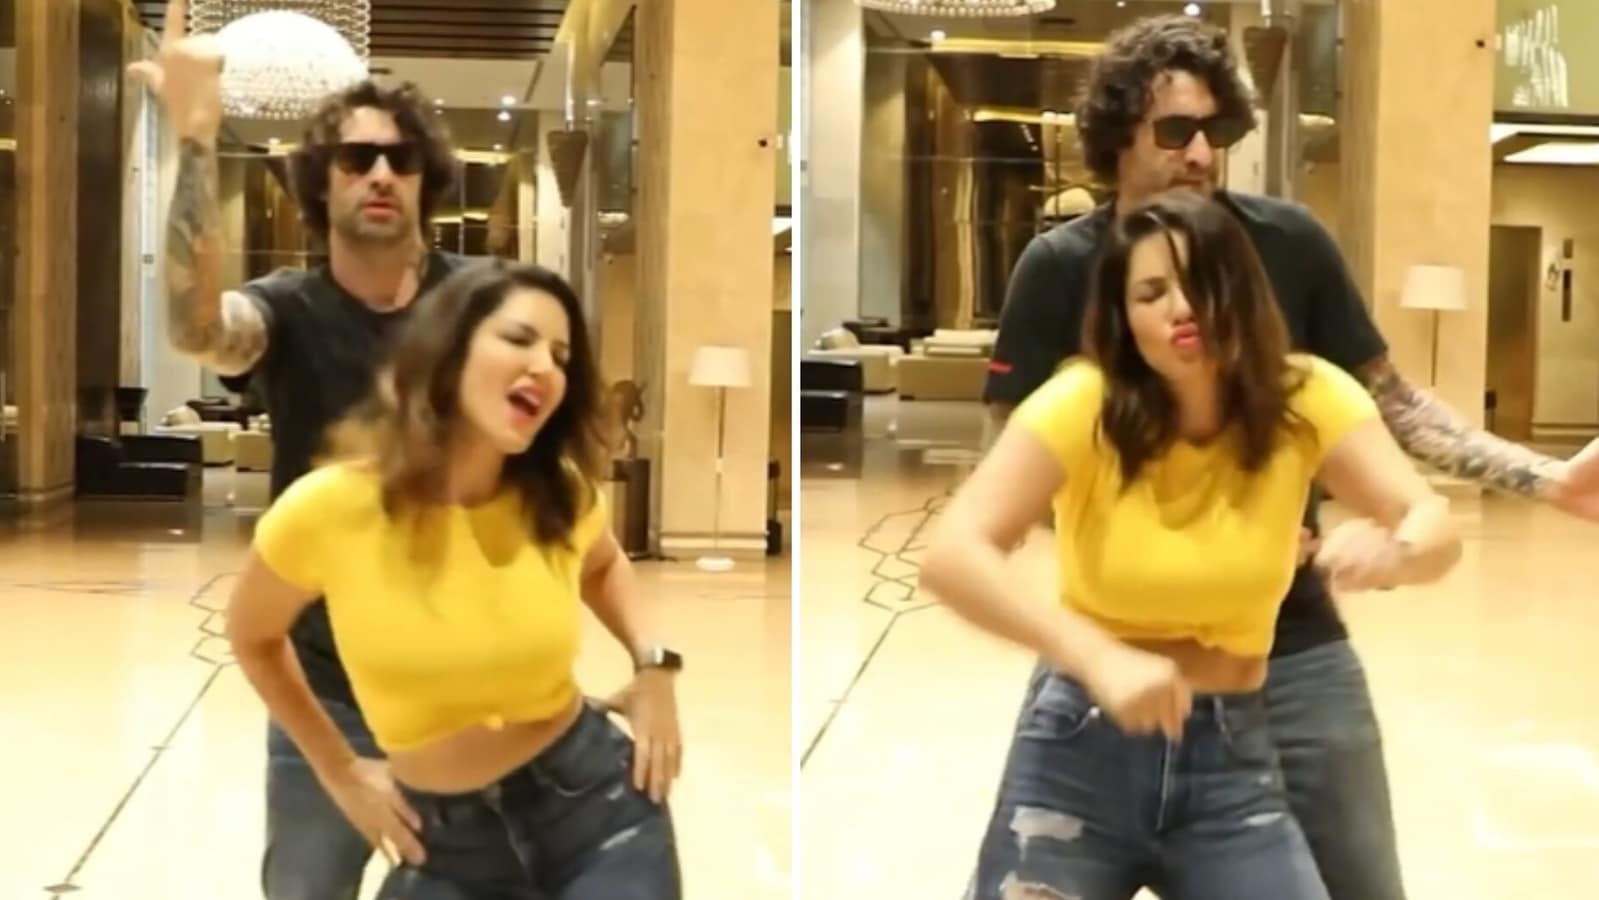 Sunny Leone reveals how she keeps the spark alive with Daniel Weber after 10 years together pic pic